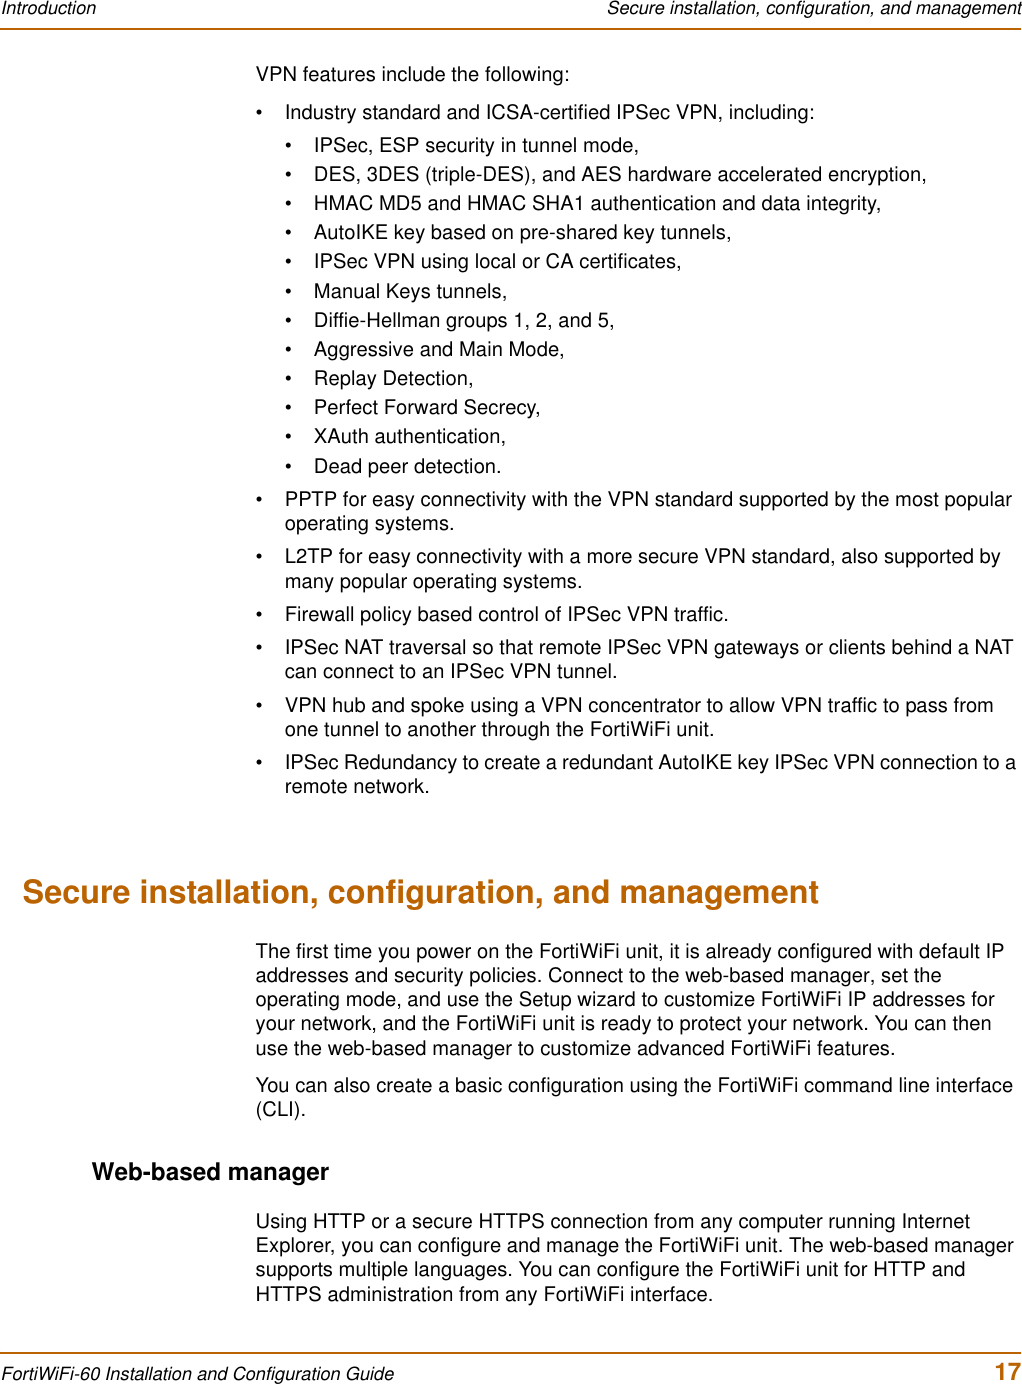 Introduction  Secure installation, configuration, and managementFortiWiFi-60 Installation and Configuration Guide  17VPN features include the following:• Industry standard and ICSA-certified IPSec VPN, including:• IPSec, ESP security in tunnel mode,• DES, 3DES (triple-DES), and AES hardware accelerated encryption,• HMAC MD5 and HMAC SHA1 authentication and data integrity,• AutoIKE key based on pre-shared key tunnels,• IPSec VPN using local or CA certificates,• Manual Keys tunnels,• Diffie-Hellman groups 1, 2, and 5,• Aggressive and Main Mode,• Replay Detection,• Perfect Forward Secrecy,• XAuth authentication,• Dead peer detection.• PPTP for easy connectivity with the VPN standard supported by the most popular operating systems.• L2TP for easy connectivity with a more secure VPN standard, also supported by many popular operating systems.• Firewall policy based control of IPSec VPN traffic.• IPSec NAT traversal so that remote IPSec VPN gateways or clients behind a NAT can connect to an IPSec VPN tunnel.• VPN hub and spoke using a VPN concentrator to allow VPN traffic to pass from one tunnel to another through the FortiWiFi unit.• IPSec Redundancy to create a redundant AutoIKE key IPSec VPN connection to a remote network.Secure installation, configuration, and managementThe first time you power on the FortiWiFi unit, it is already configured with default IP addresses and security policies. Connect to the web-based manager, set the operating mode, and use the Setup wizard to customize FortiWiFi IP addresses for your network, and the FortiWiFi unit is ready to protect your network. You can then use the web-based manager to customize advanced FortiWiFi features.You can also create a basic configuration using the FortiWiFi command line interface (CLI).Web-based managerUsing HTTP or a secure HTTPS connection from any computer running Internet Explorer, you can configure and manage the FortiWiFi unit. The web-based manager supports multiple languages. You can configure the FortiWiFi unit for HTTP and HTTPS administration from any FortiWiFi interface.